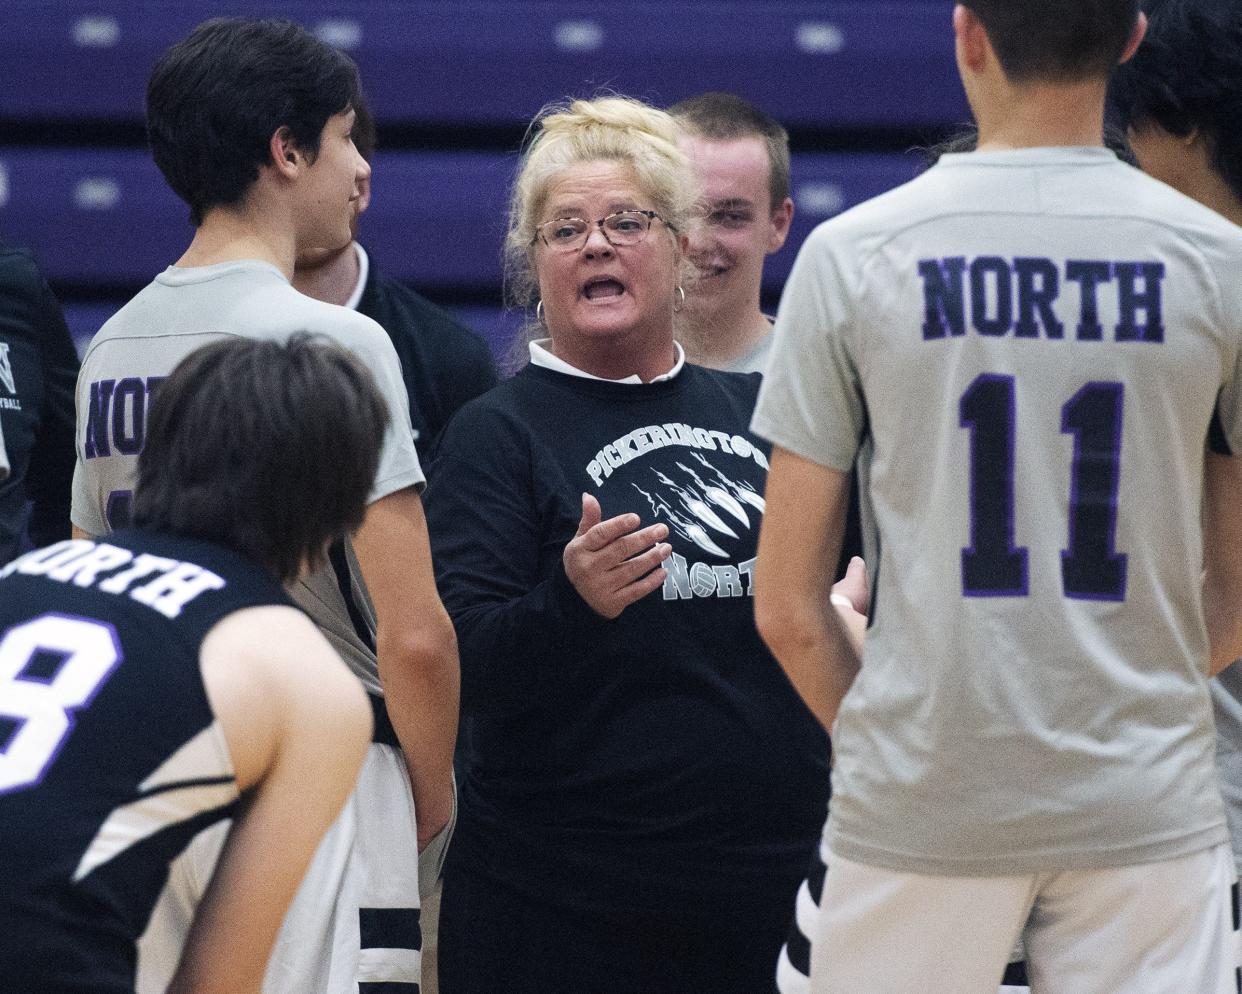 North coach Marci Truex instructs her team during a match earlier this season. The Panthers have dedicated their season to freshman Andres Nunez Cano, who died in his sleep March 13.